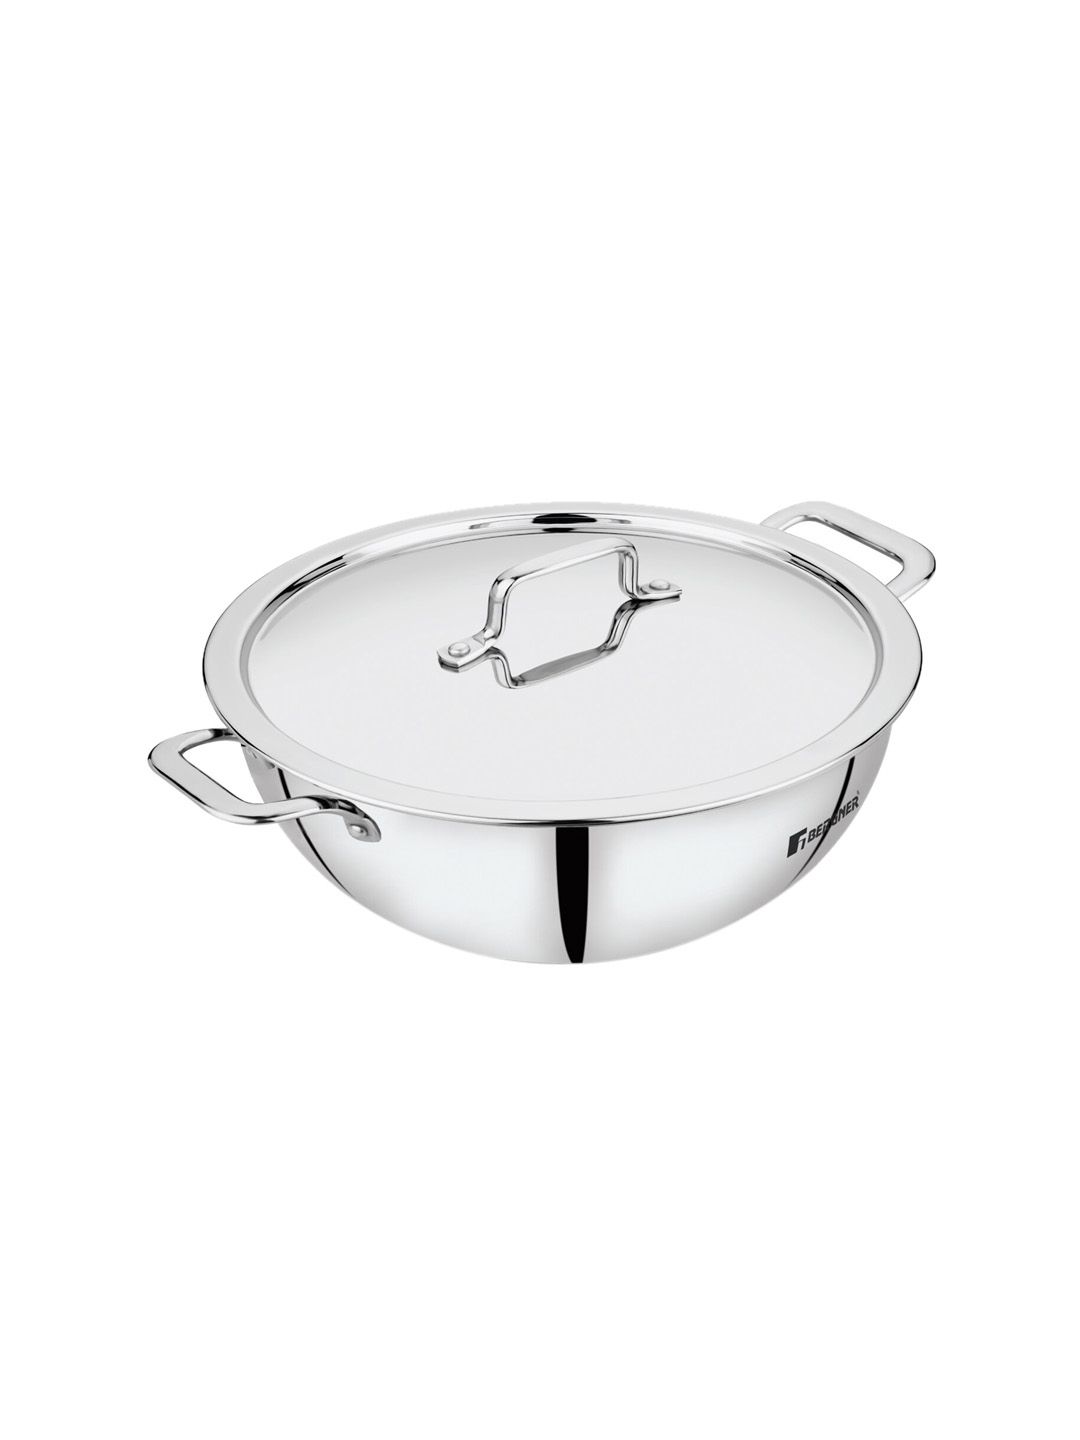 BERGNER Silver-Toned Stainless Steel Kadhai With Glass Lid Price in India